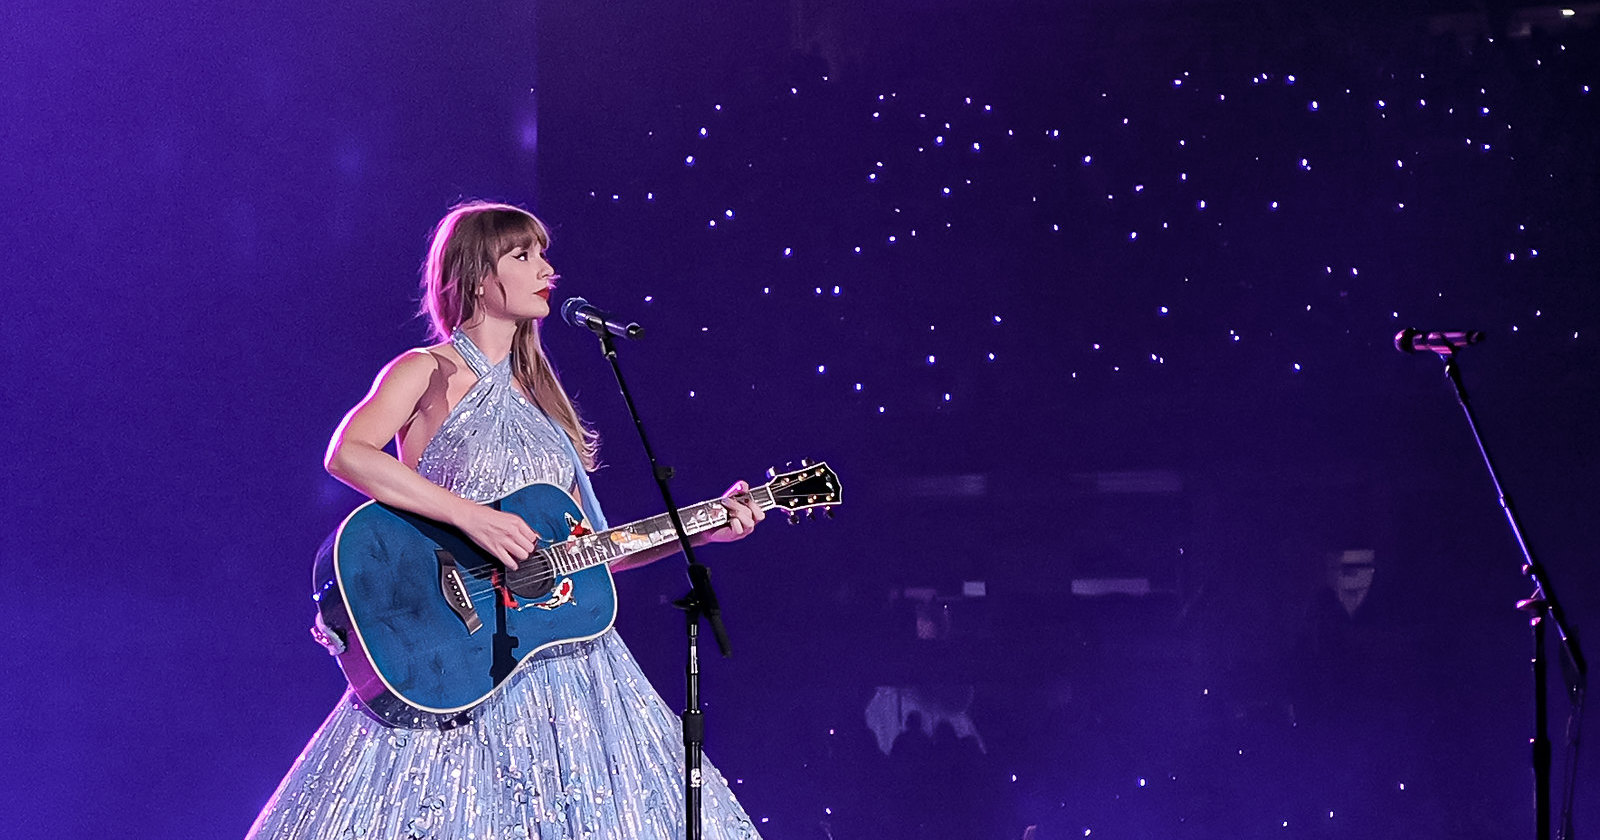 I'm a media reporter and a diehard Swiftie. I don't cover Taylor, but  here's how I wish someone would | Nieman Journalism Lab